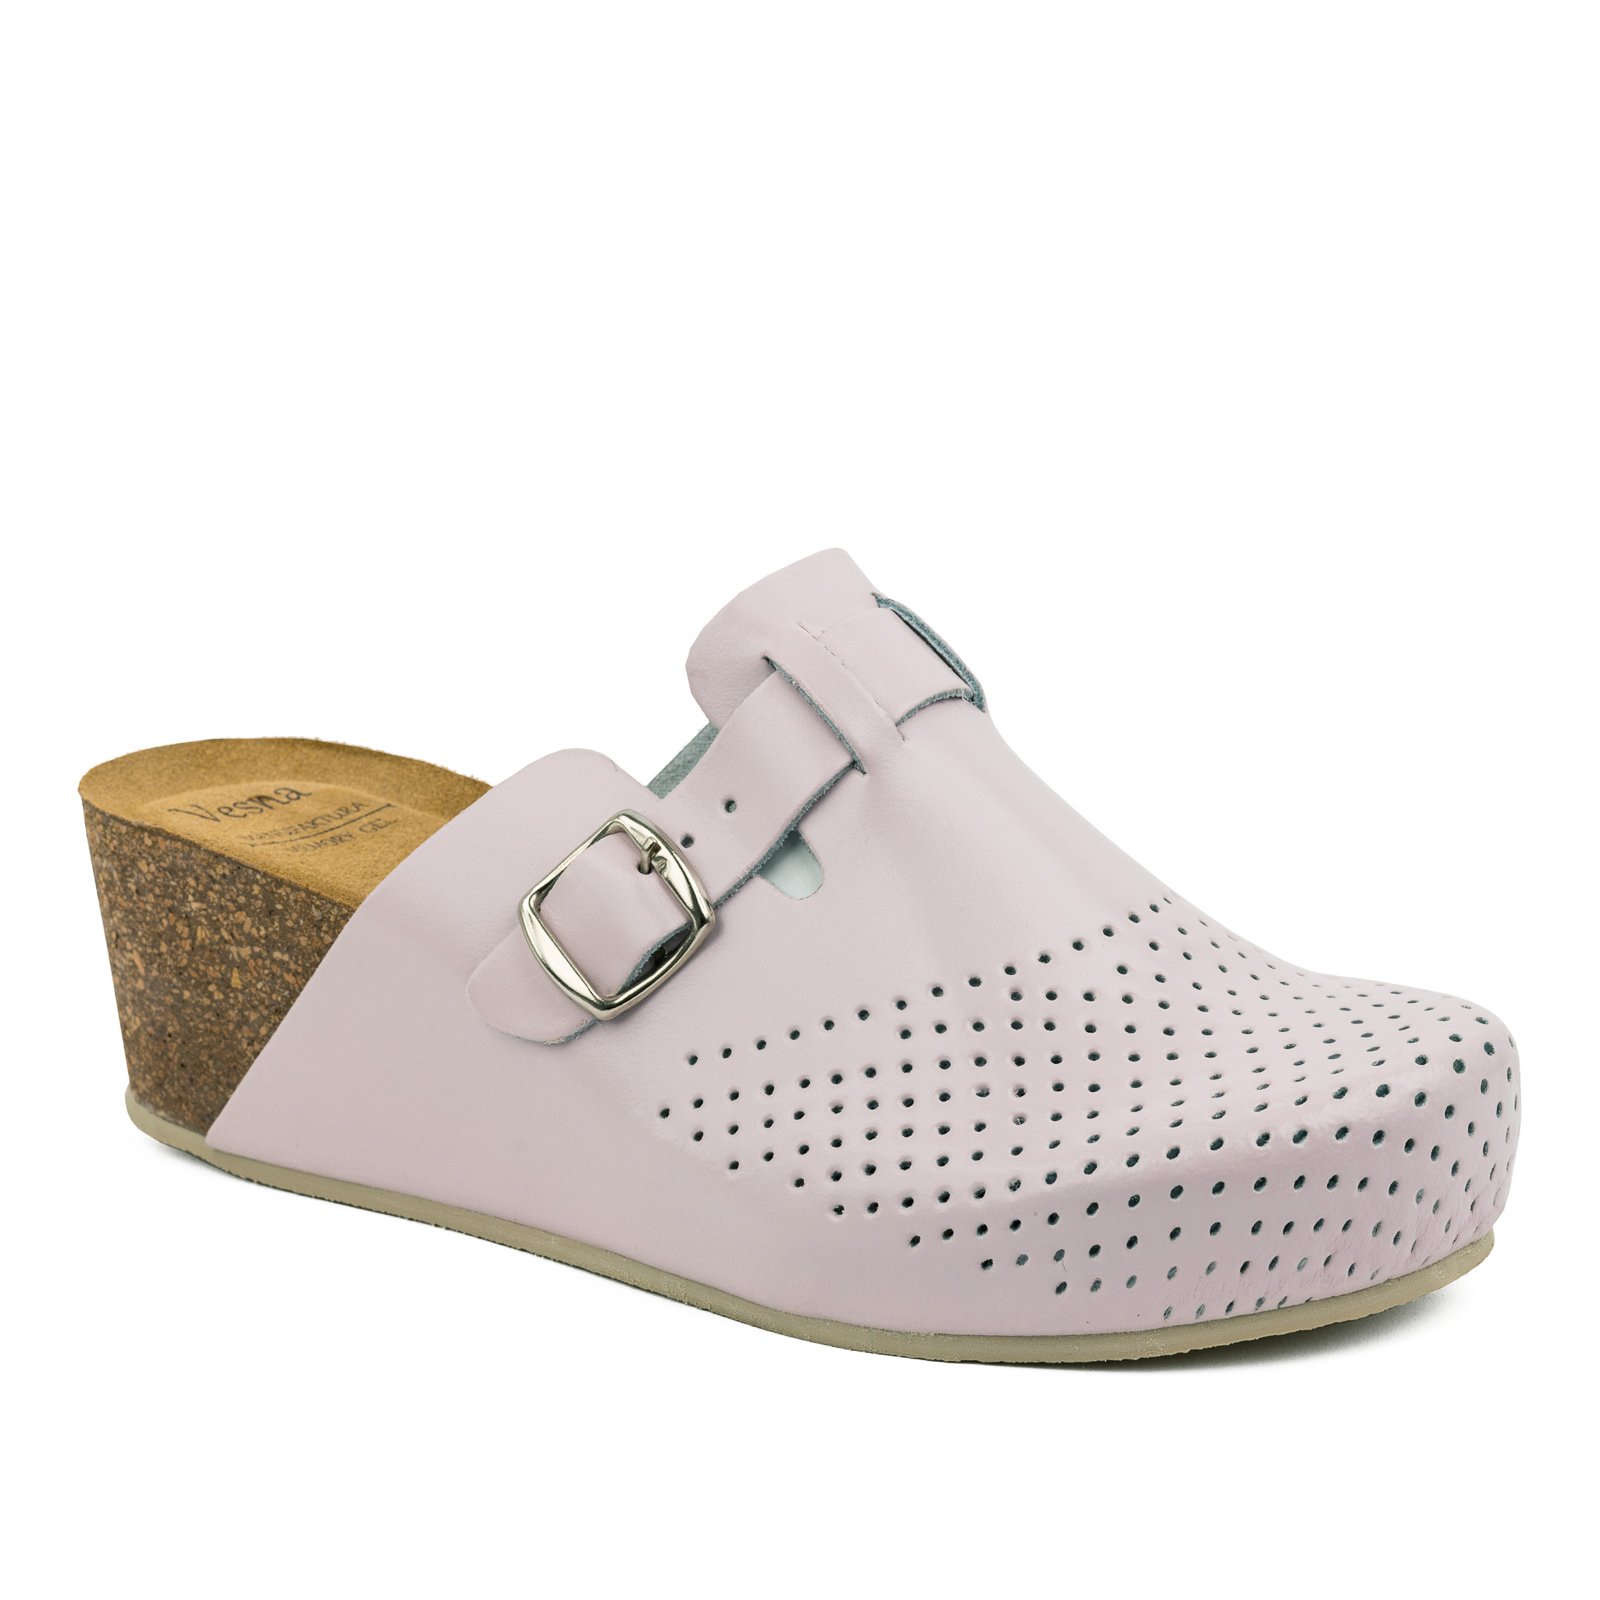 ANATOMIC LEATHER CLOGS WITH BELT AND HIGH SOLE  - ROSE